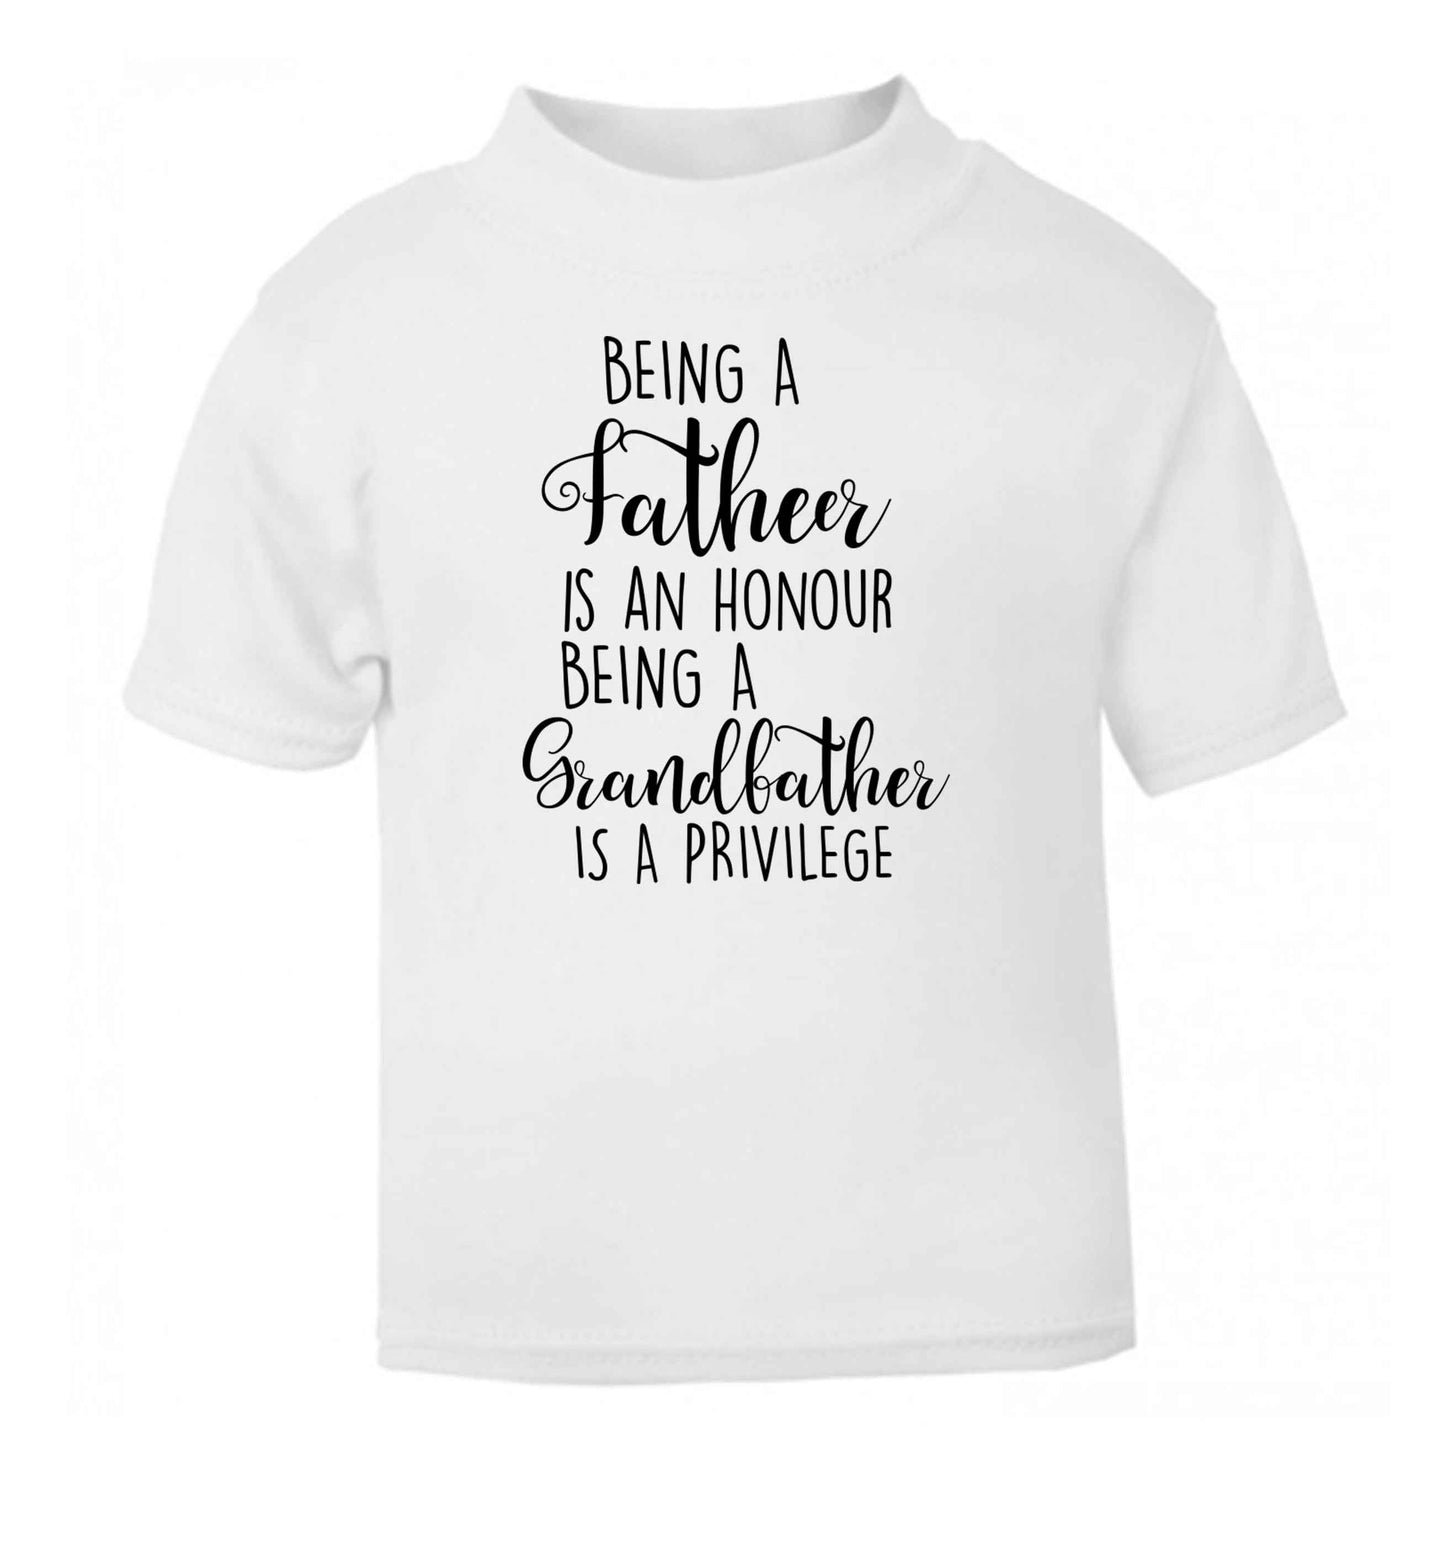 Being a father is an honour being a grandfather is a privilege white Baby Toddler Tshirt 2 Years